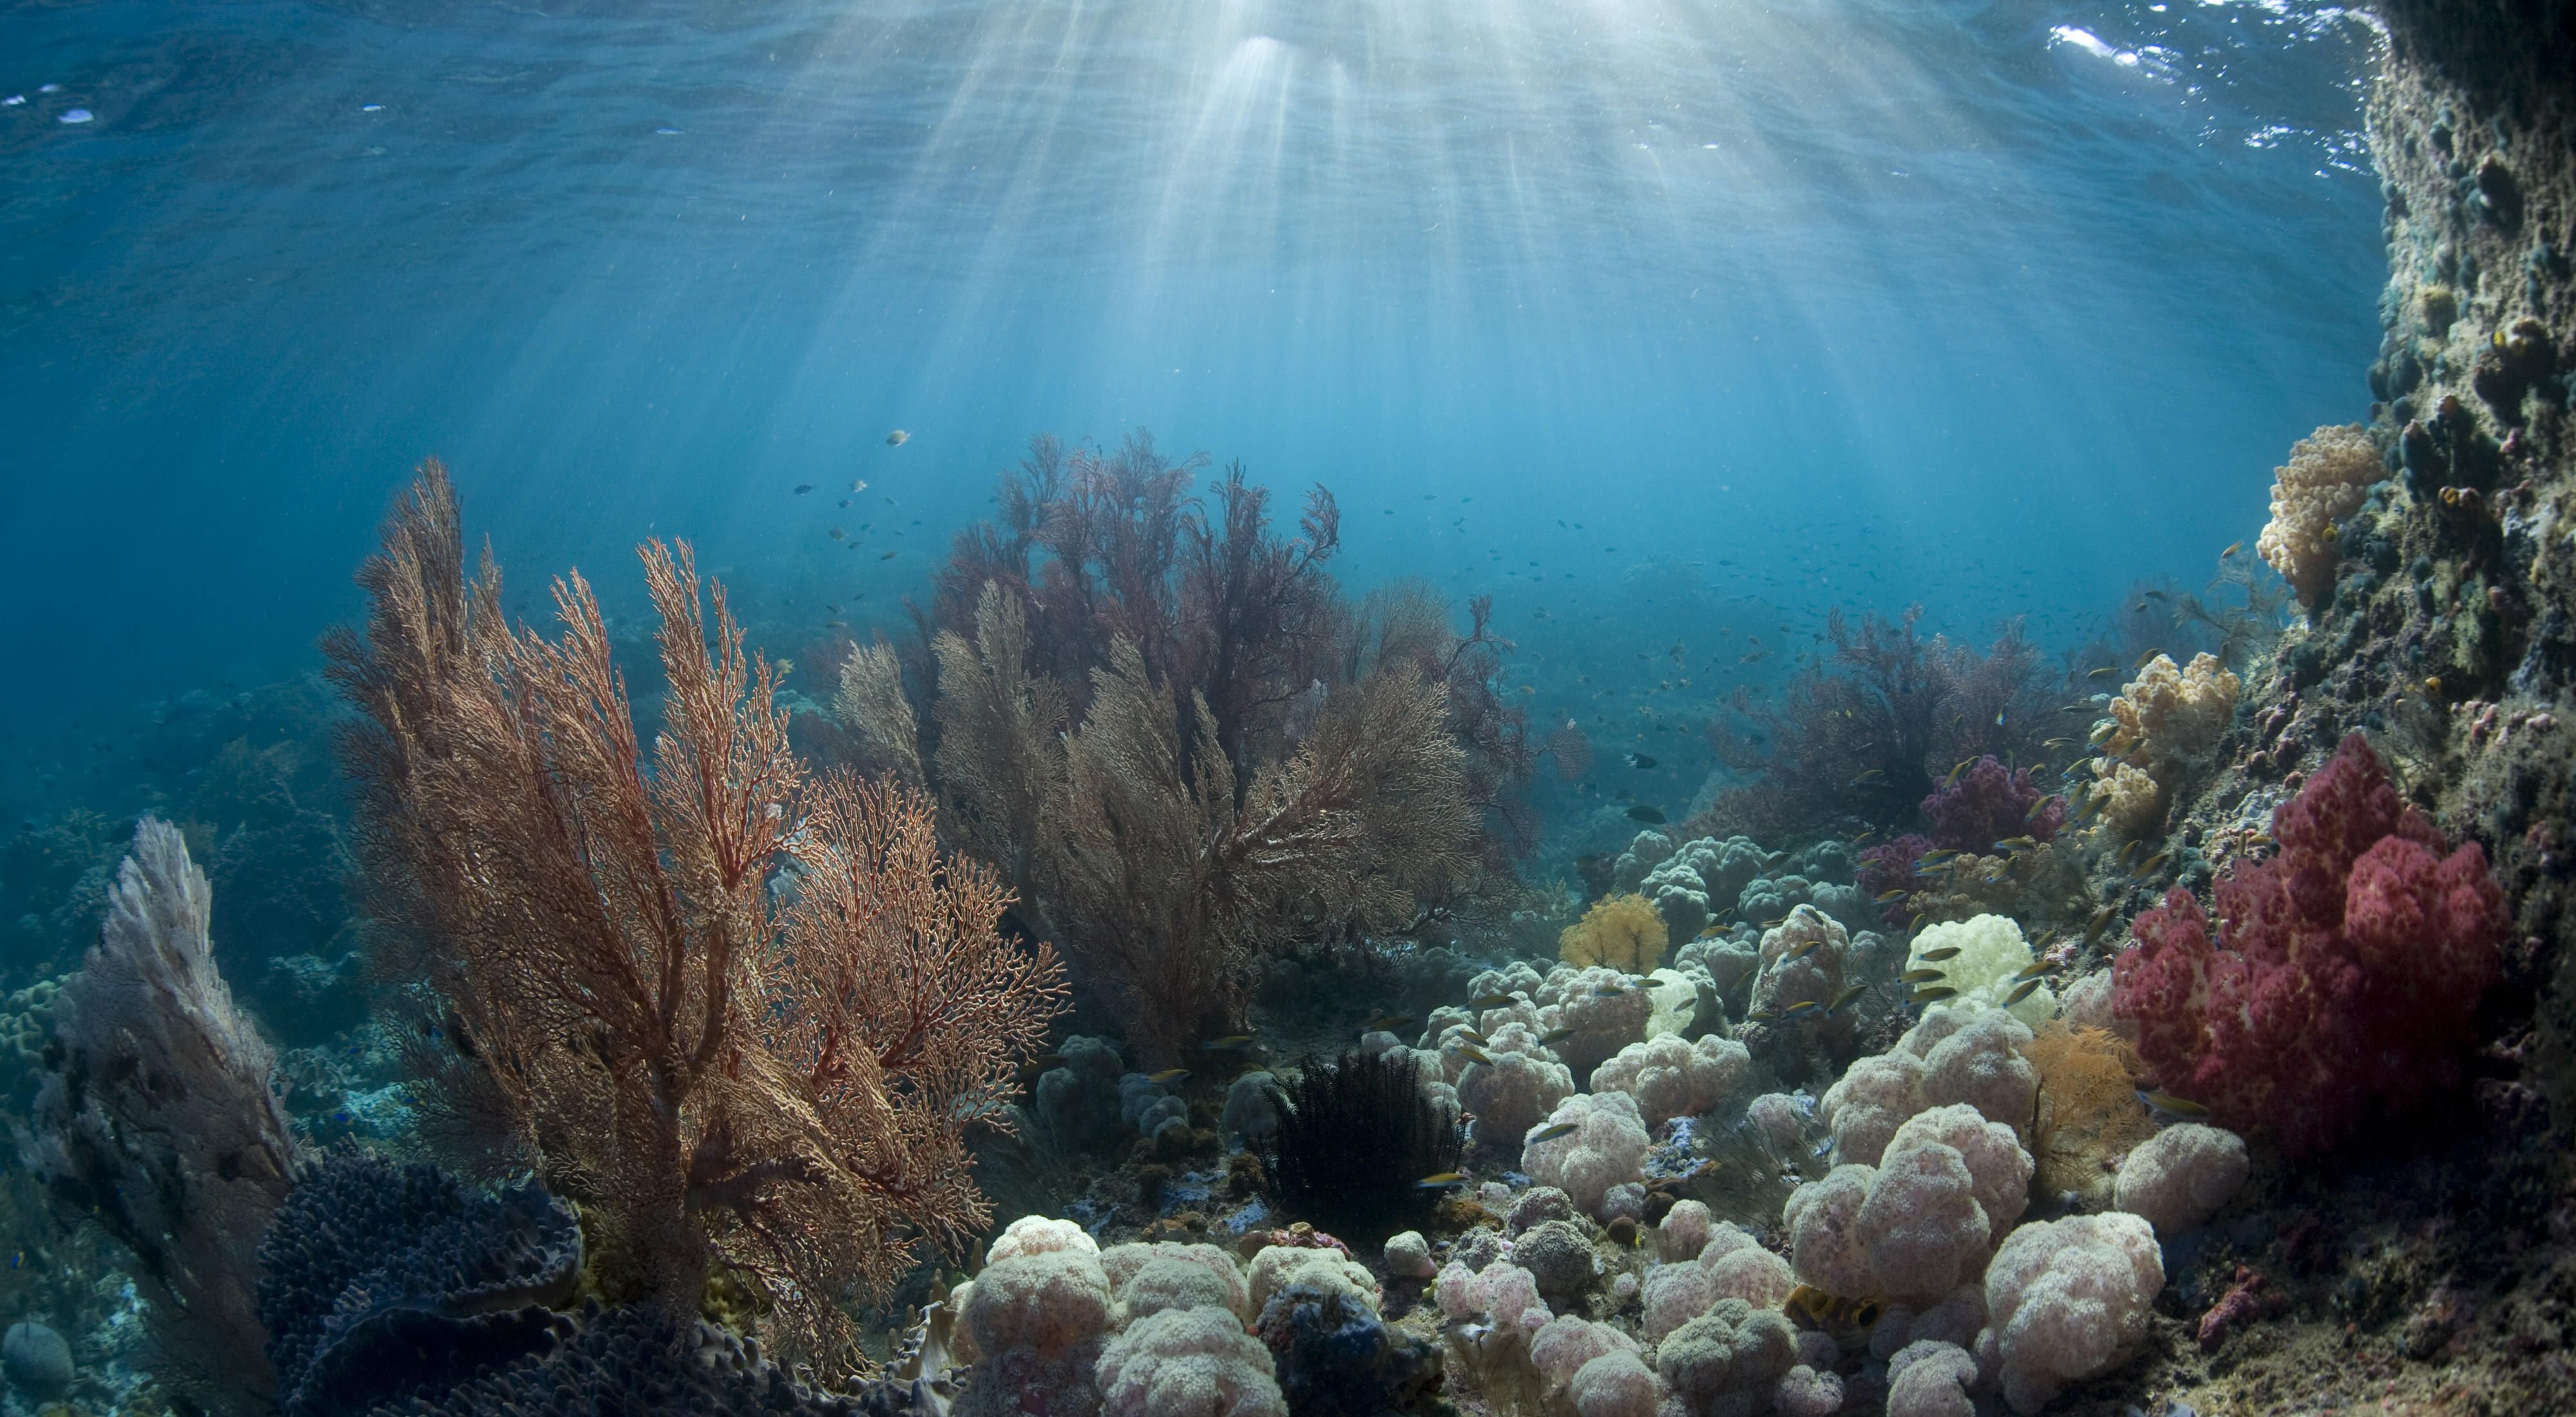 Sea fans and soft corals adorn a "coral garden" in Indonesia, Pacific Ocean